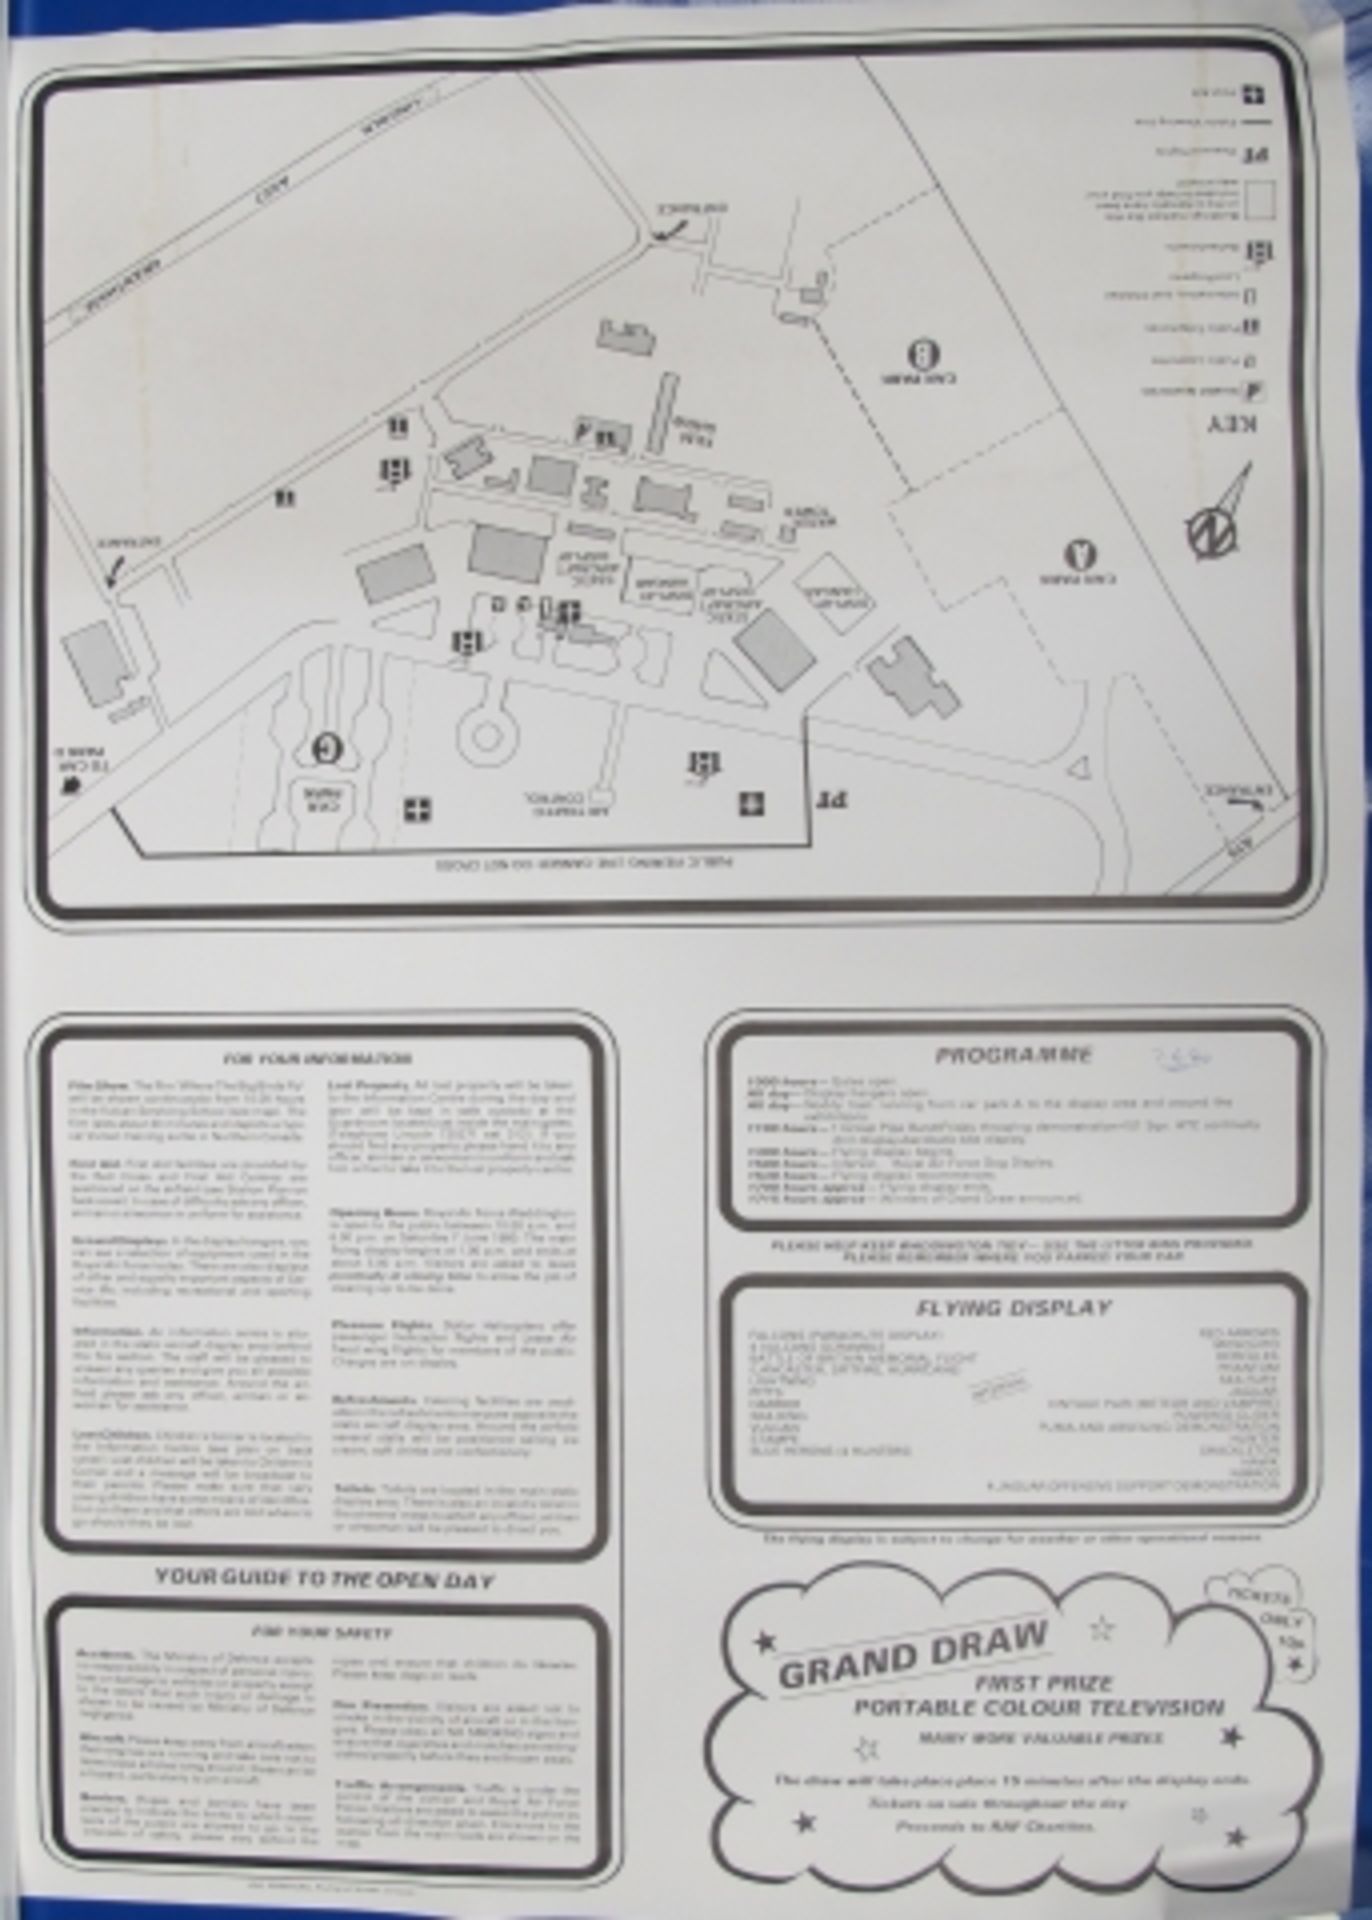 Map - British Airfields: Past and present copyright 1976 Merseyside Aviation Society, Aeromodeller - Image 15 of 18